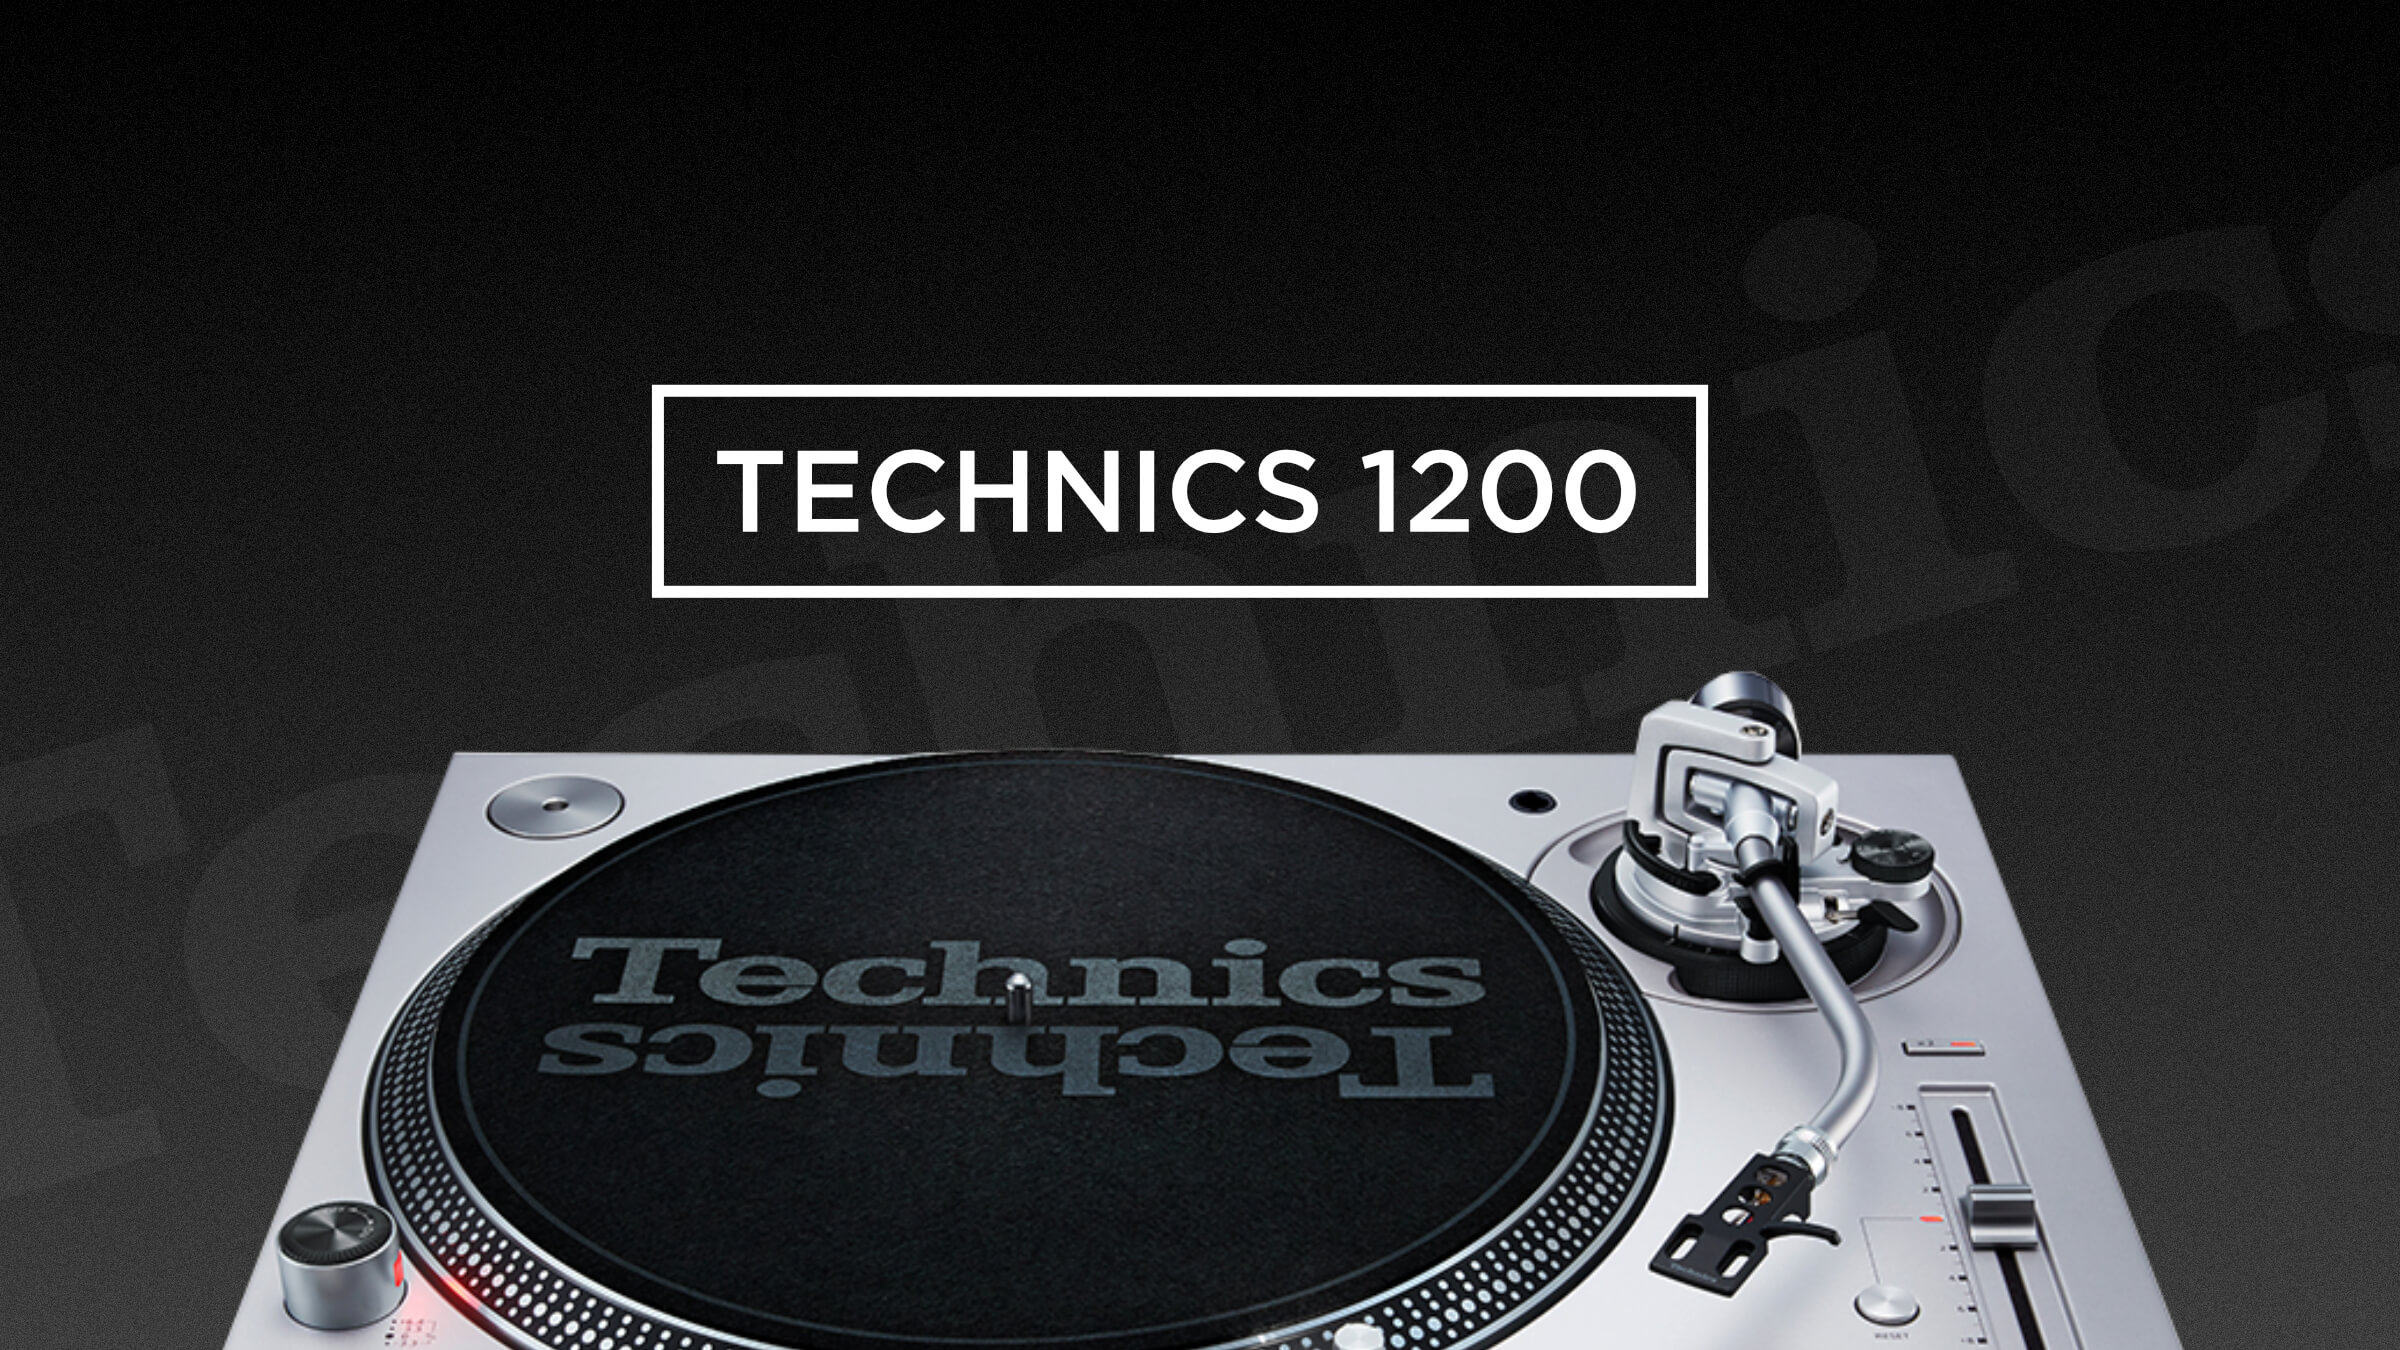 Complete History of The Technics 1200 Turntable